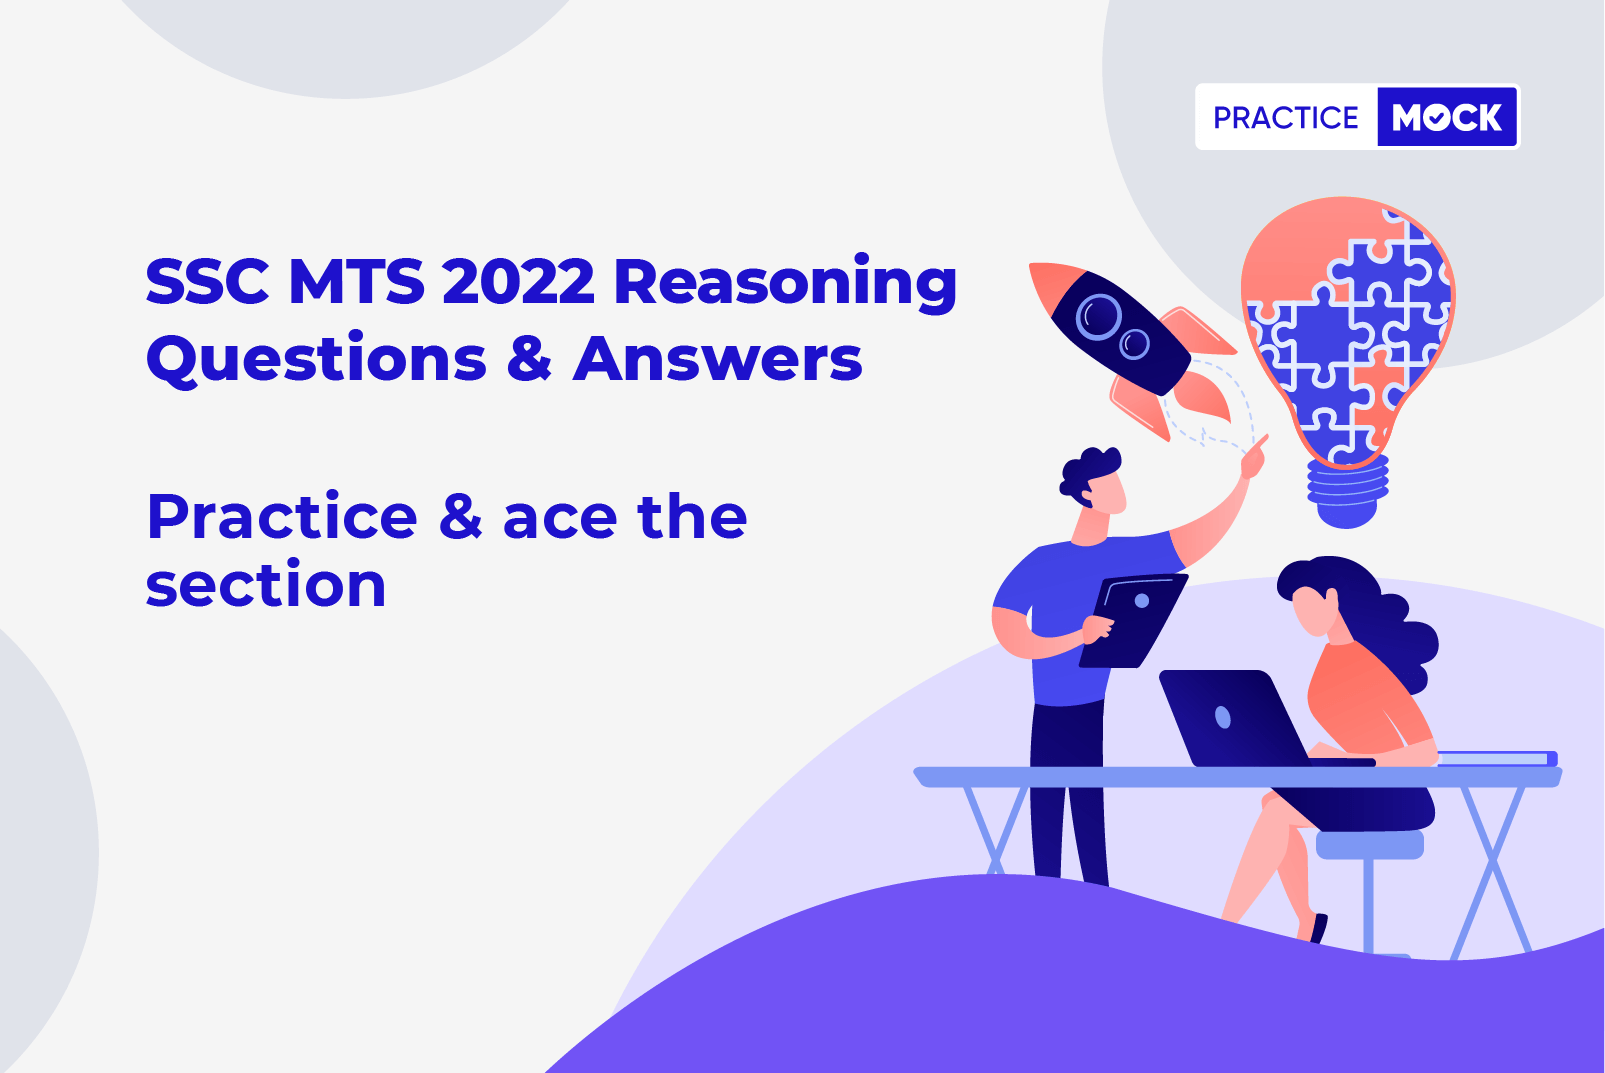 SSC MTS Reasoning Questions & Answers